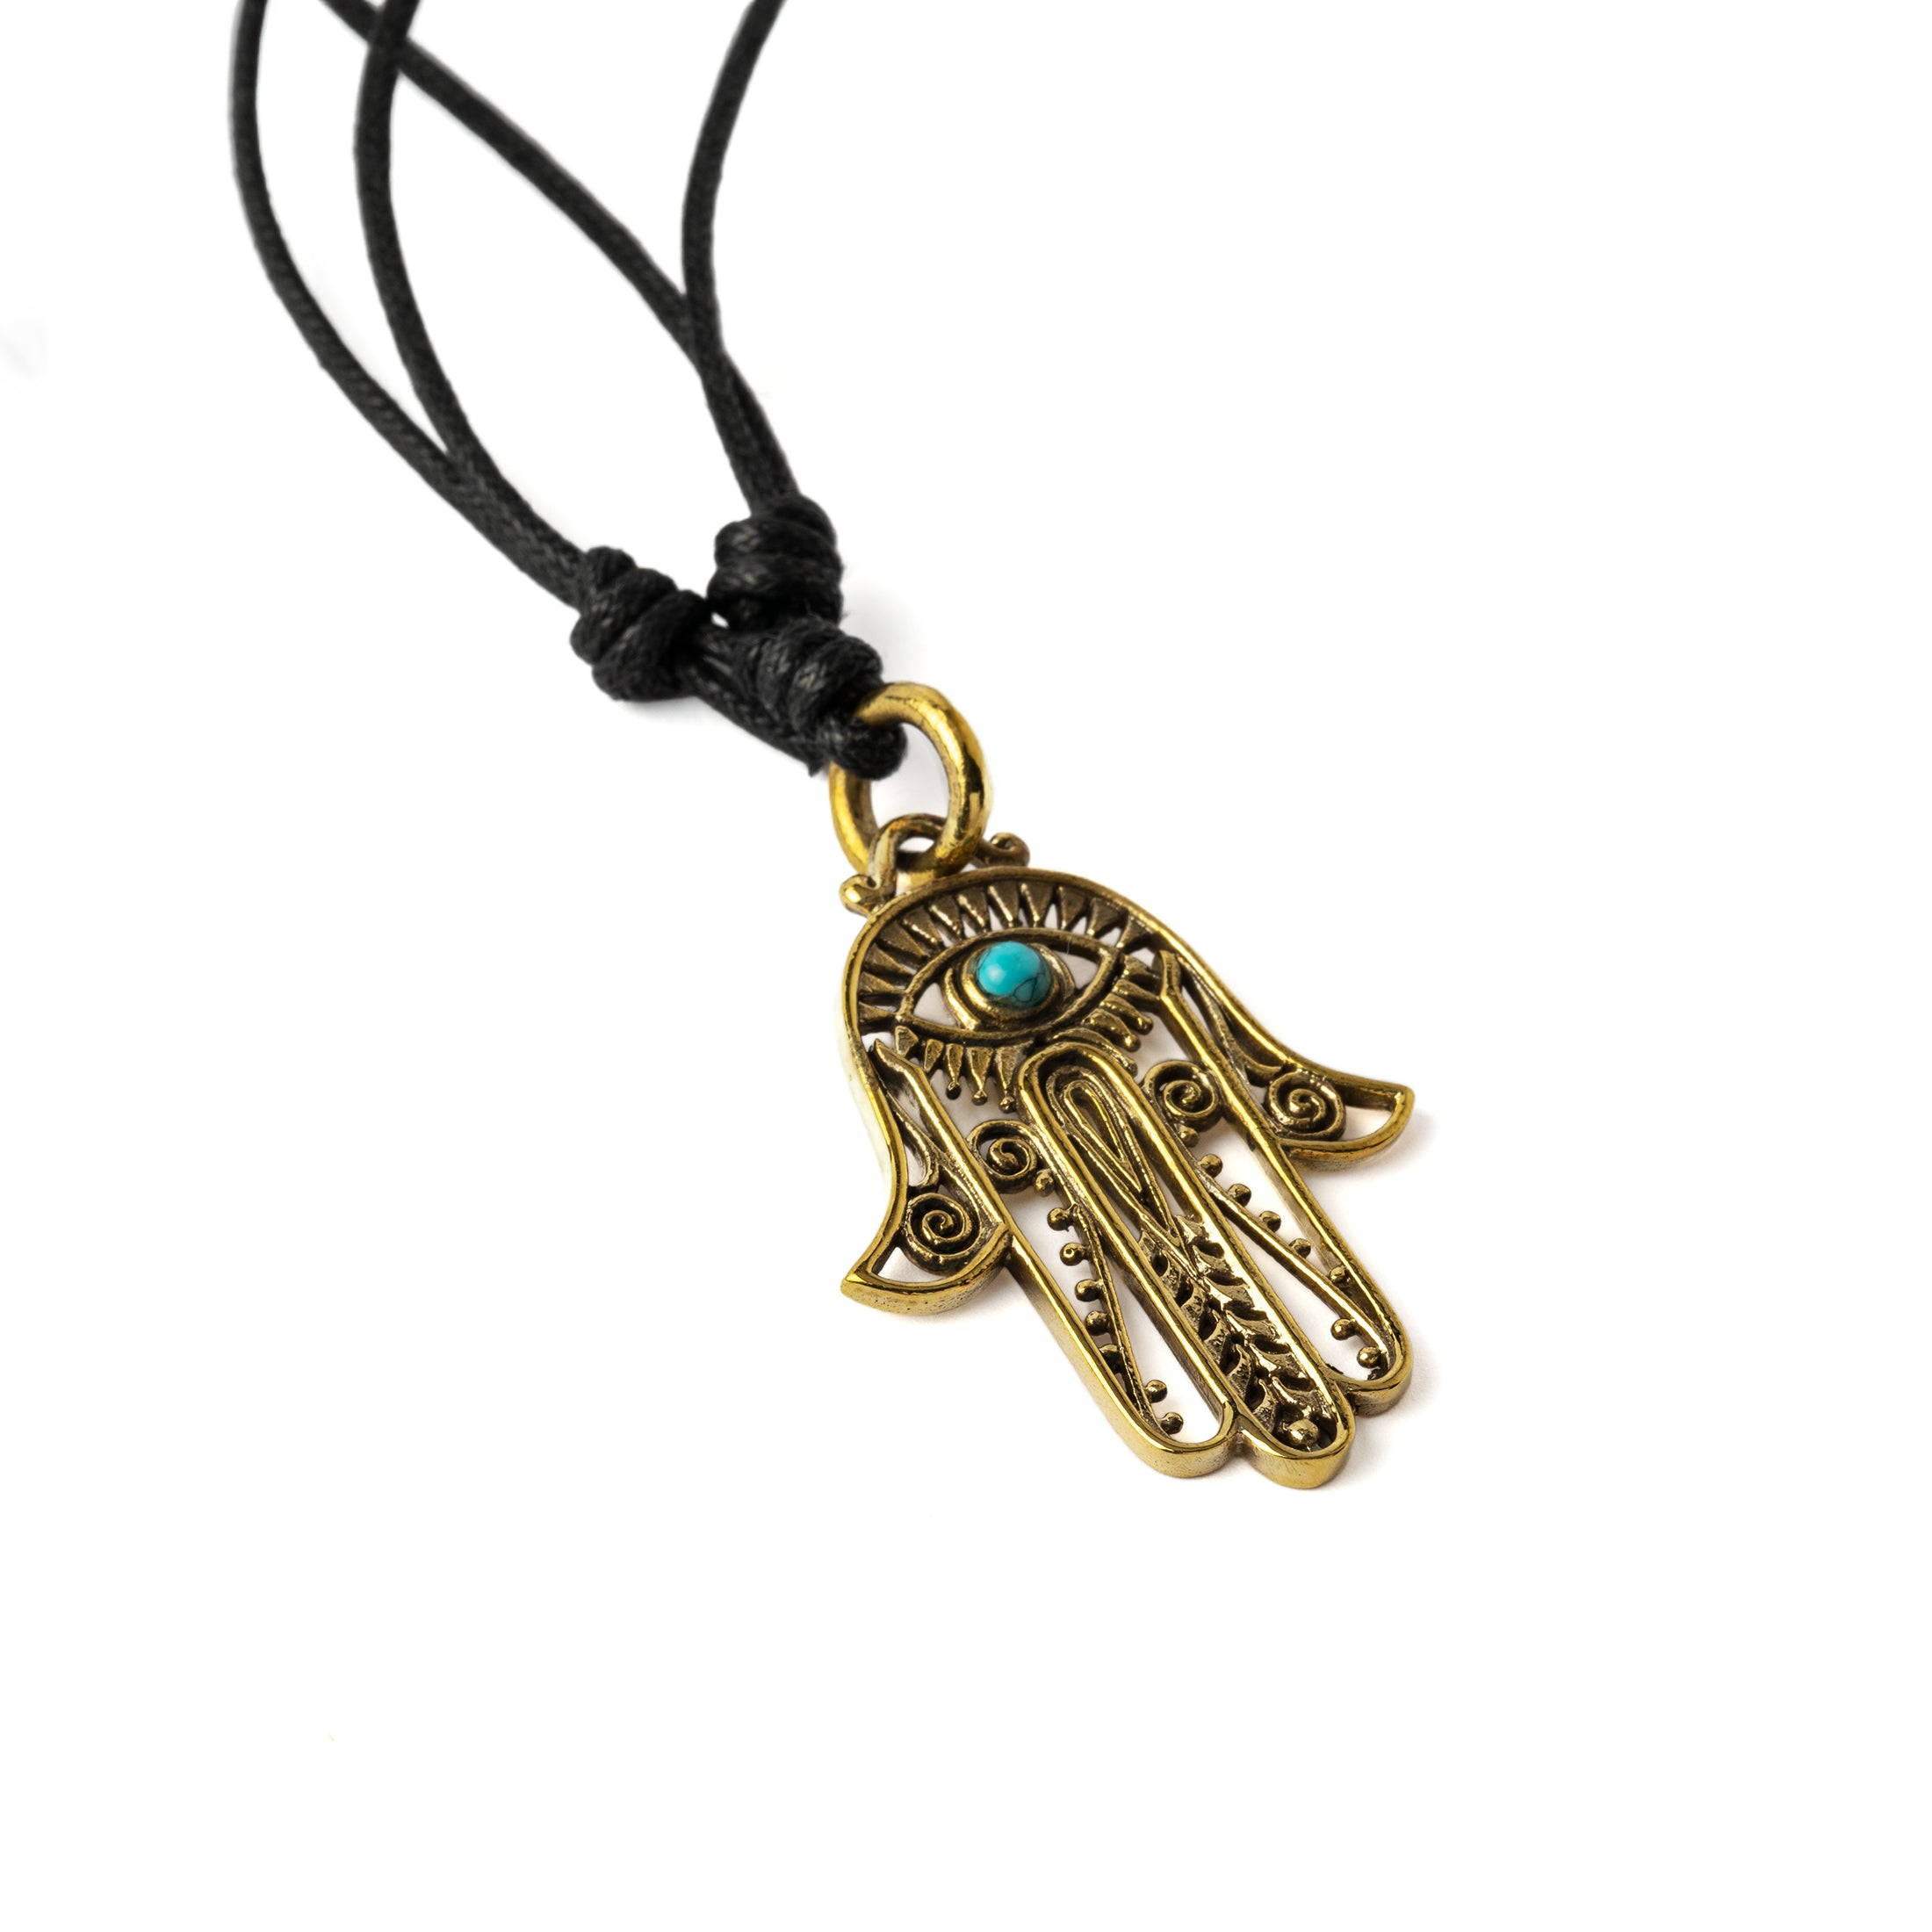 Hamsa Evil Eye Necklace left side view with Turquoise